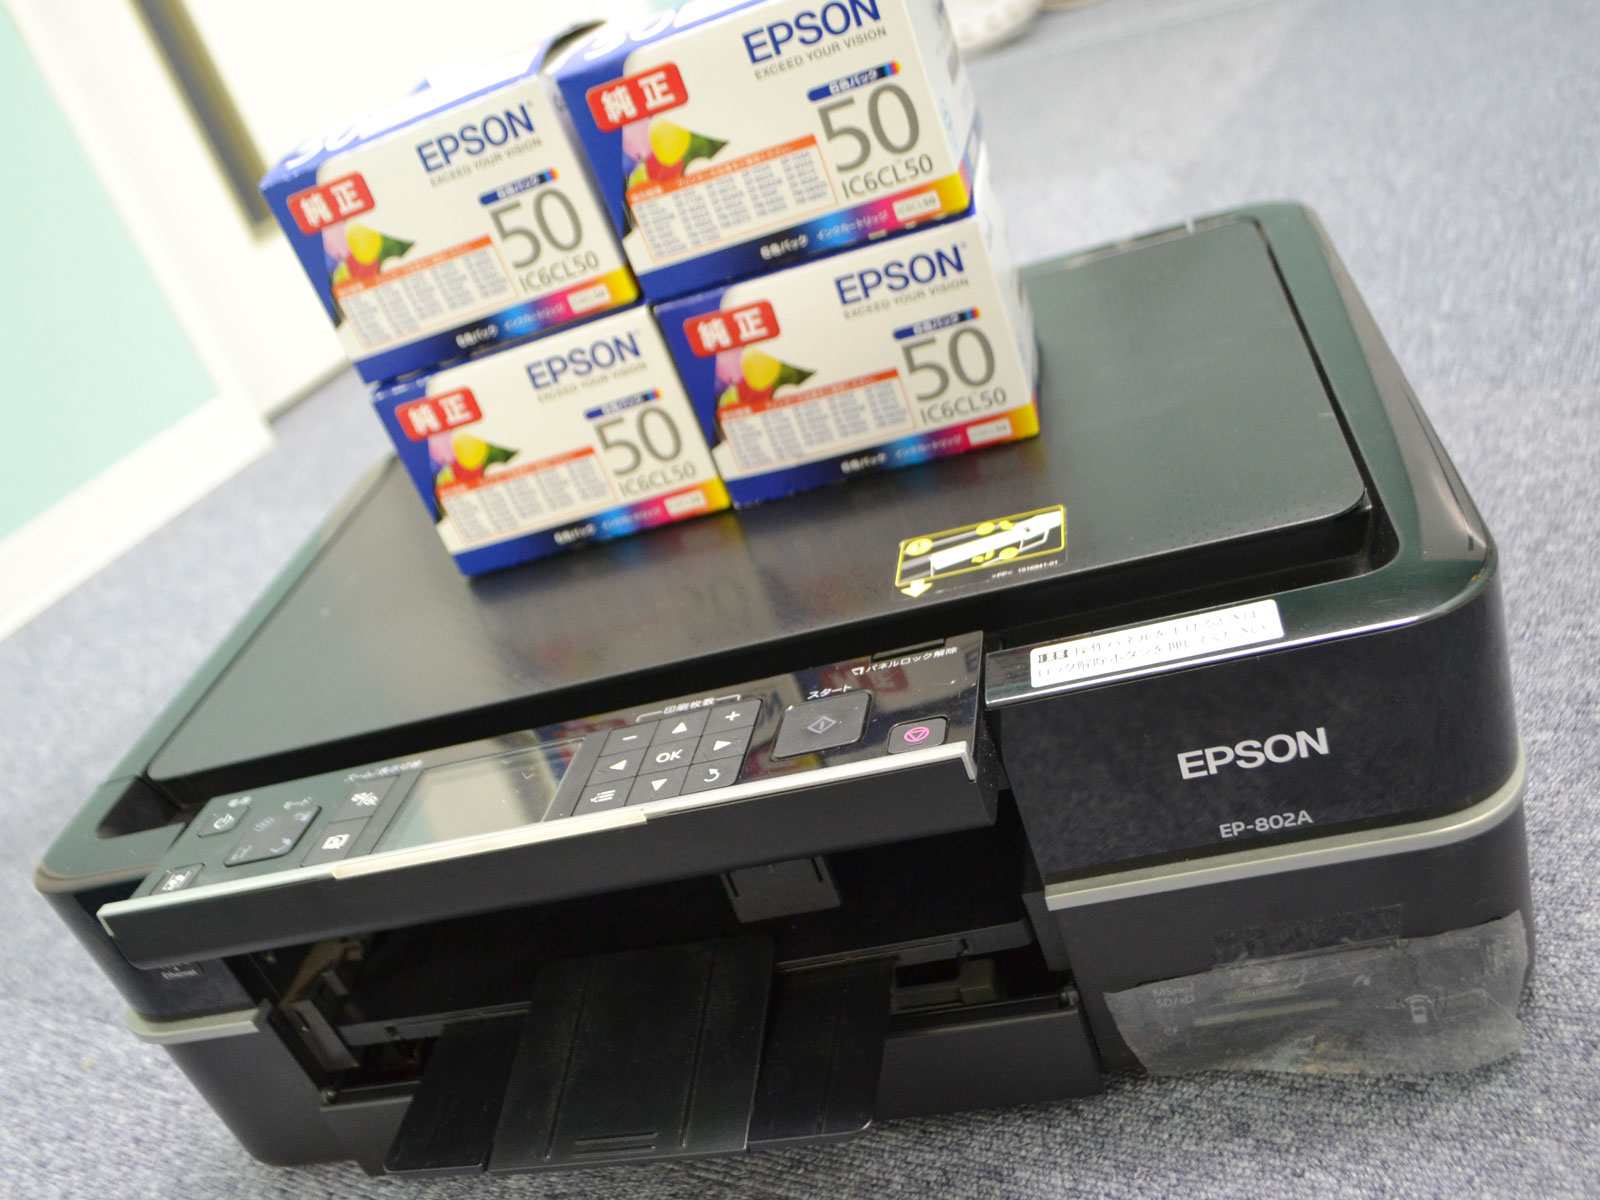 EPSON プリンター EP-802A